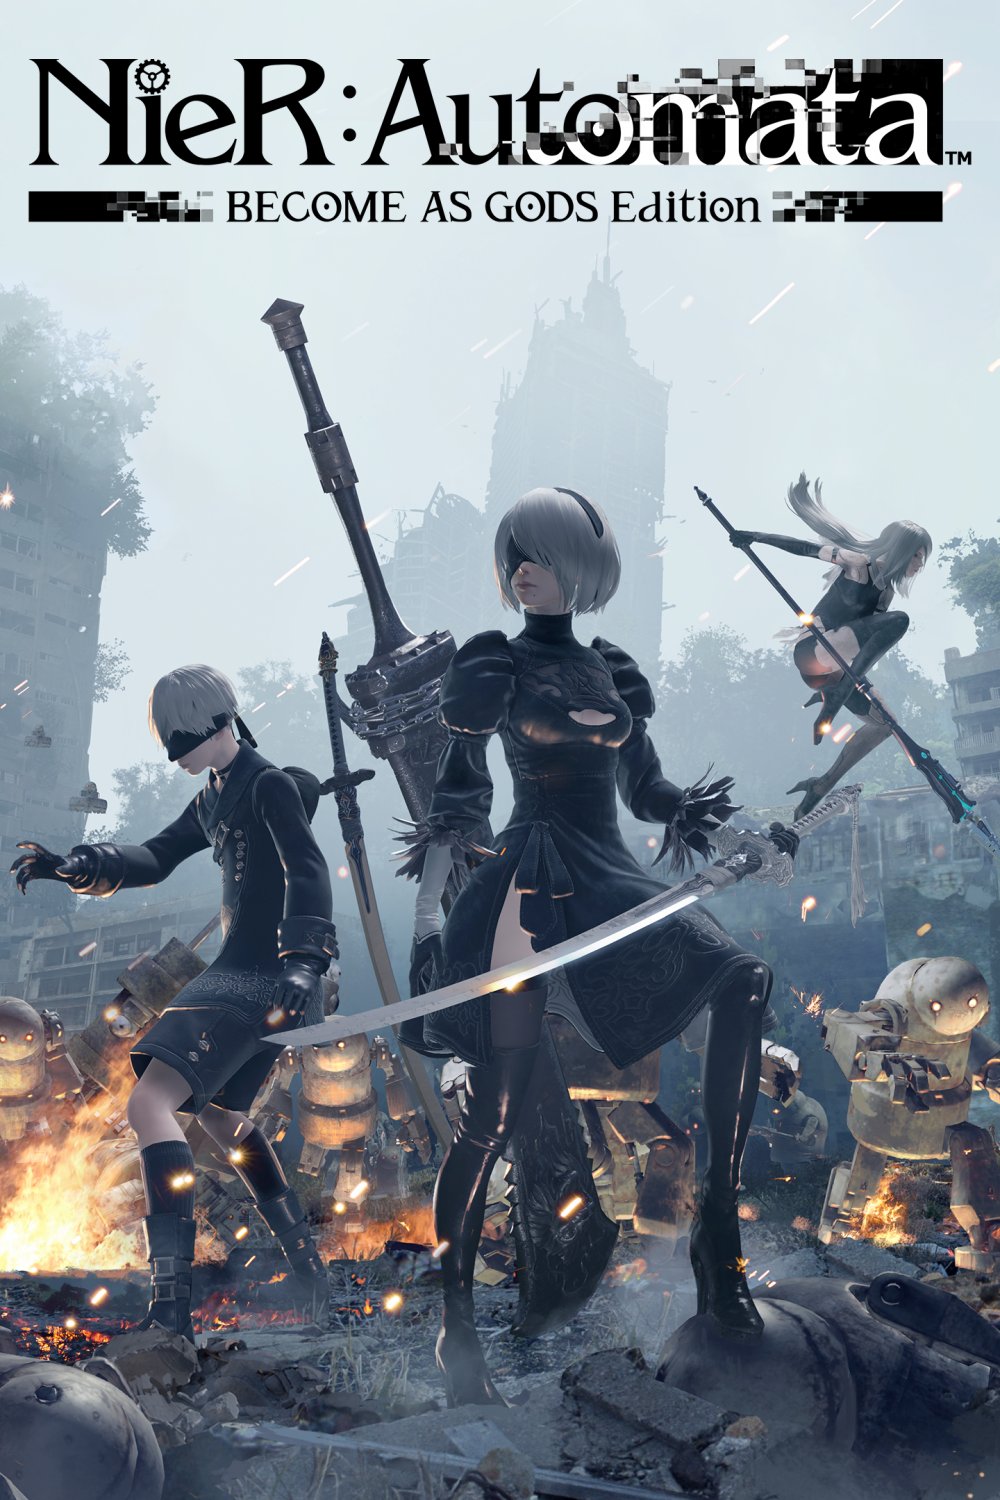 Nier Automata Become As Gods Edition Game  13"x19" (32cm/49cm) Polyester Fabric Poster